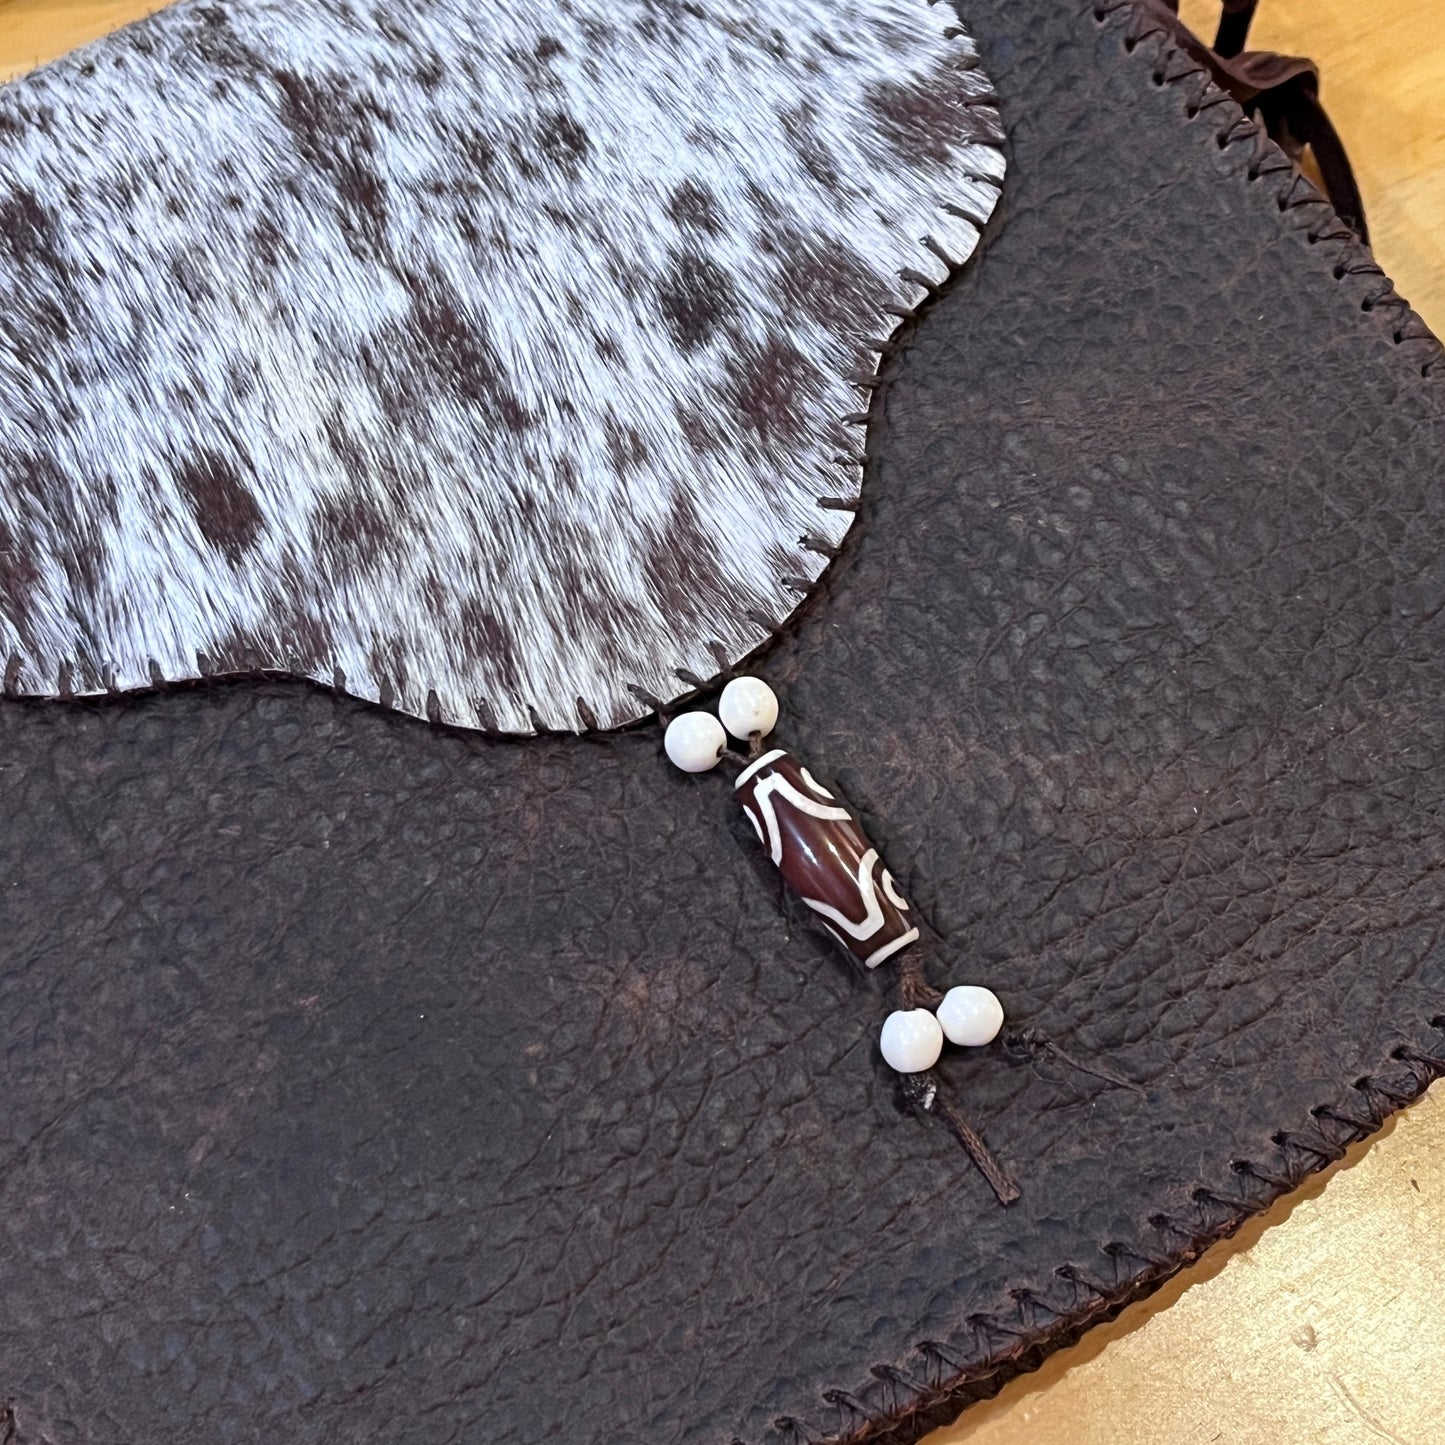 HANDCRAFTED & HAND SEWED COWHIDE PURSE